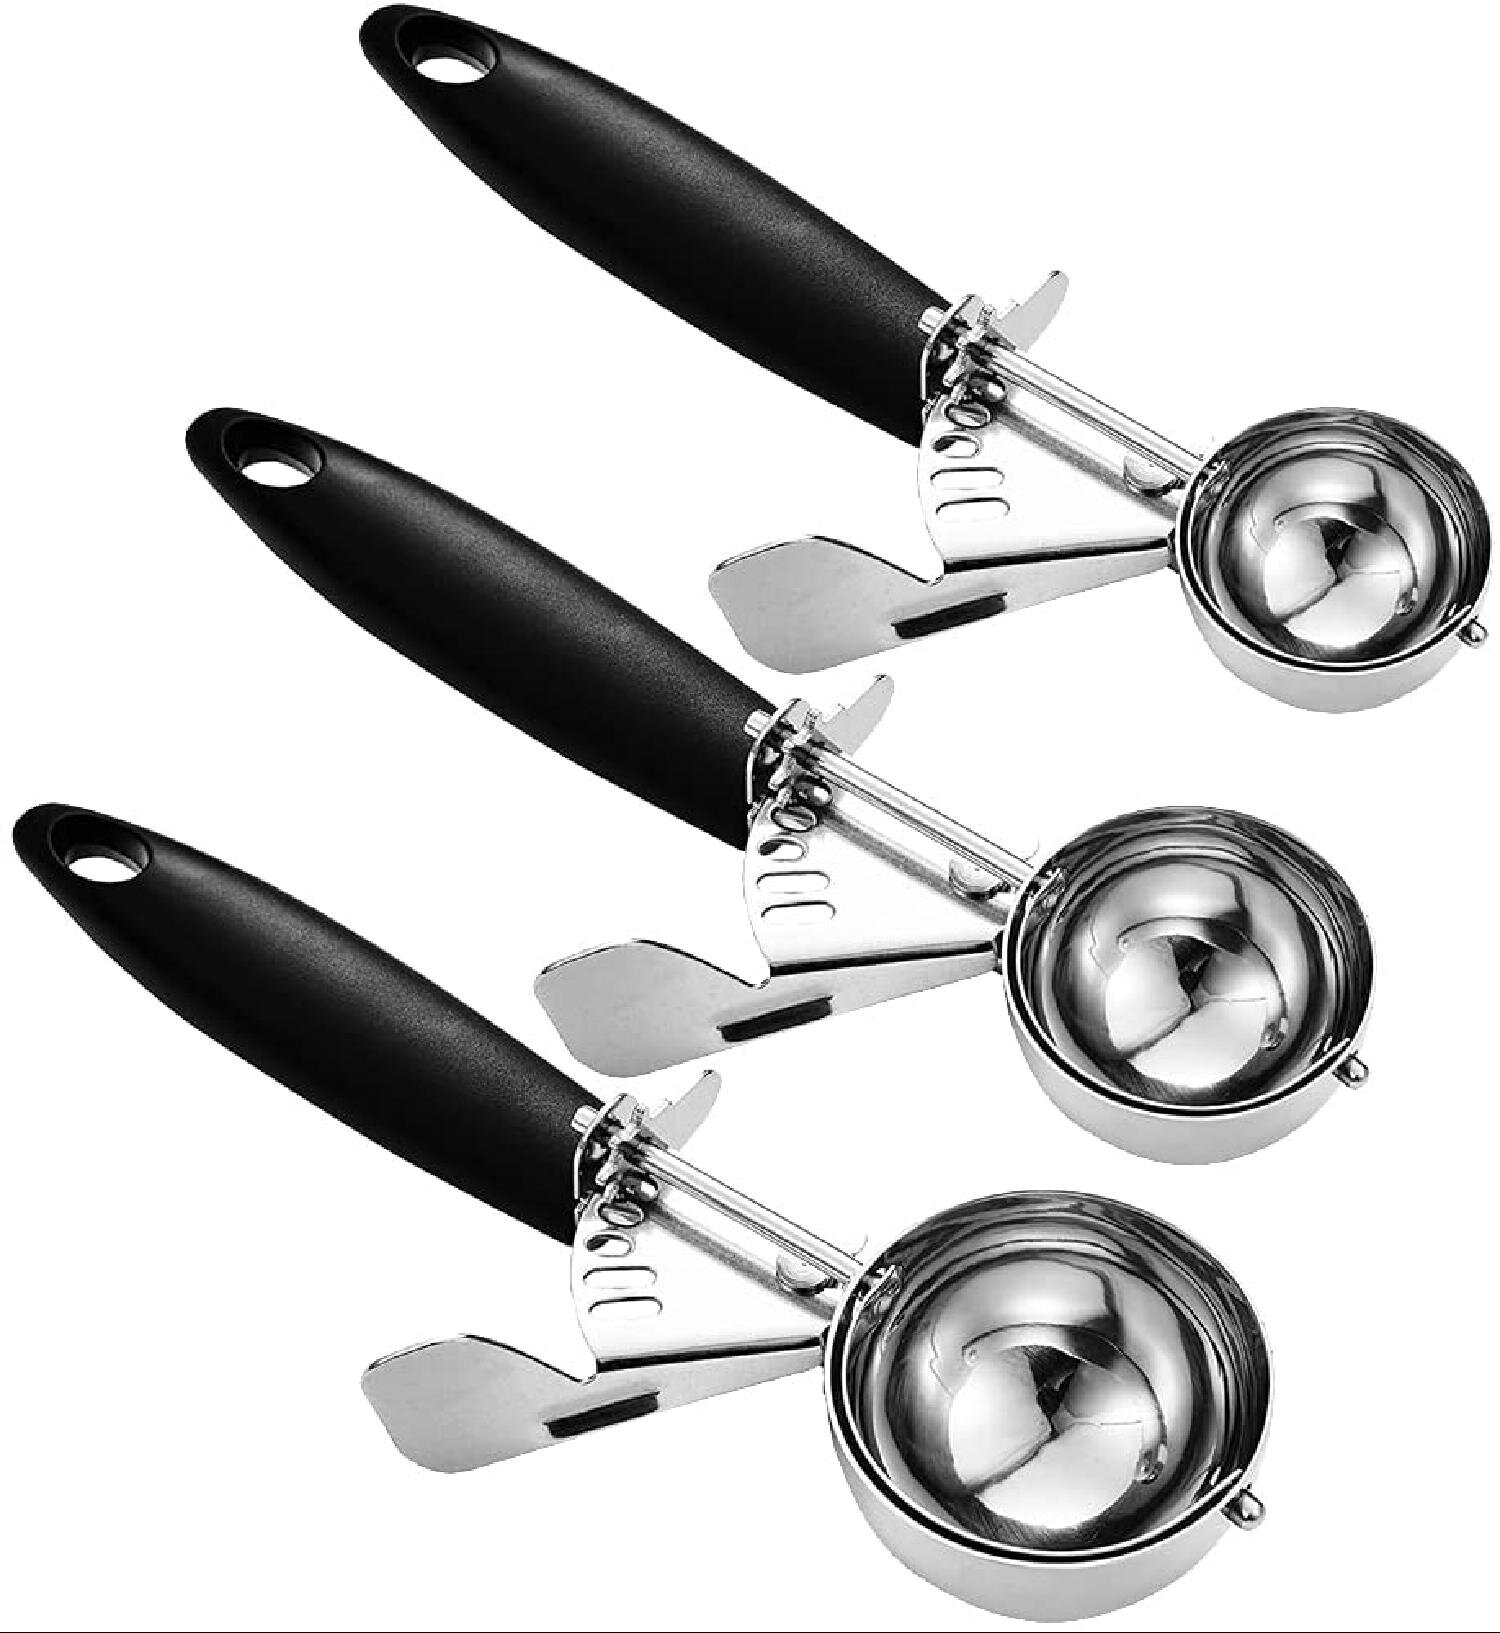 3PC Ice Cream Scoop Food Stainless Steel with Trigger Cookie Spoons Set S+M+L